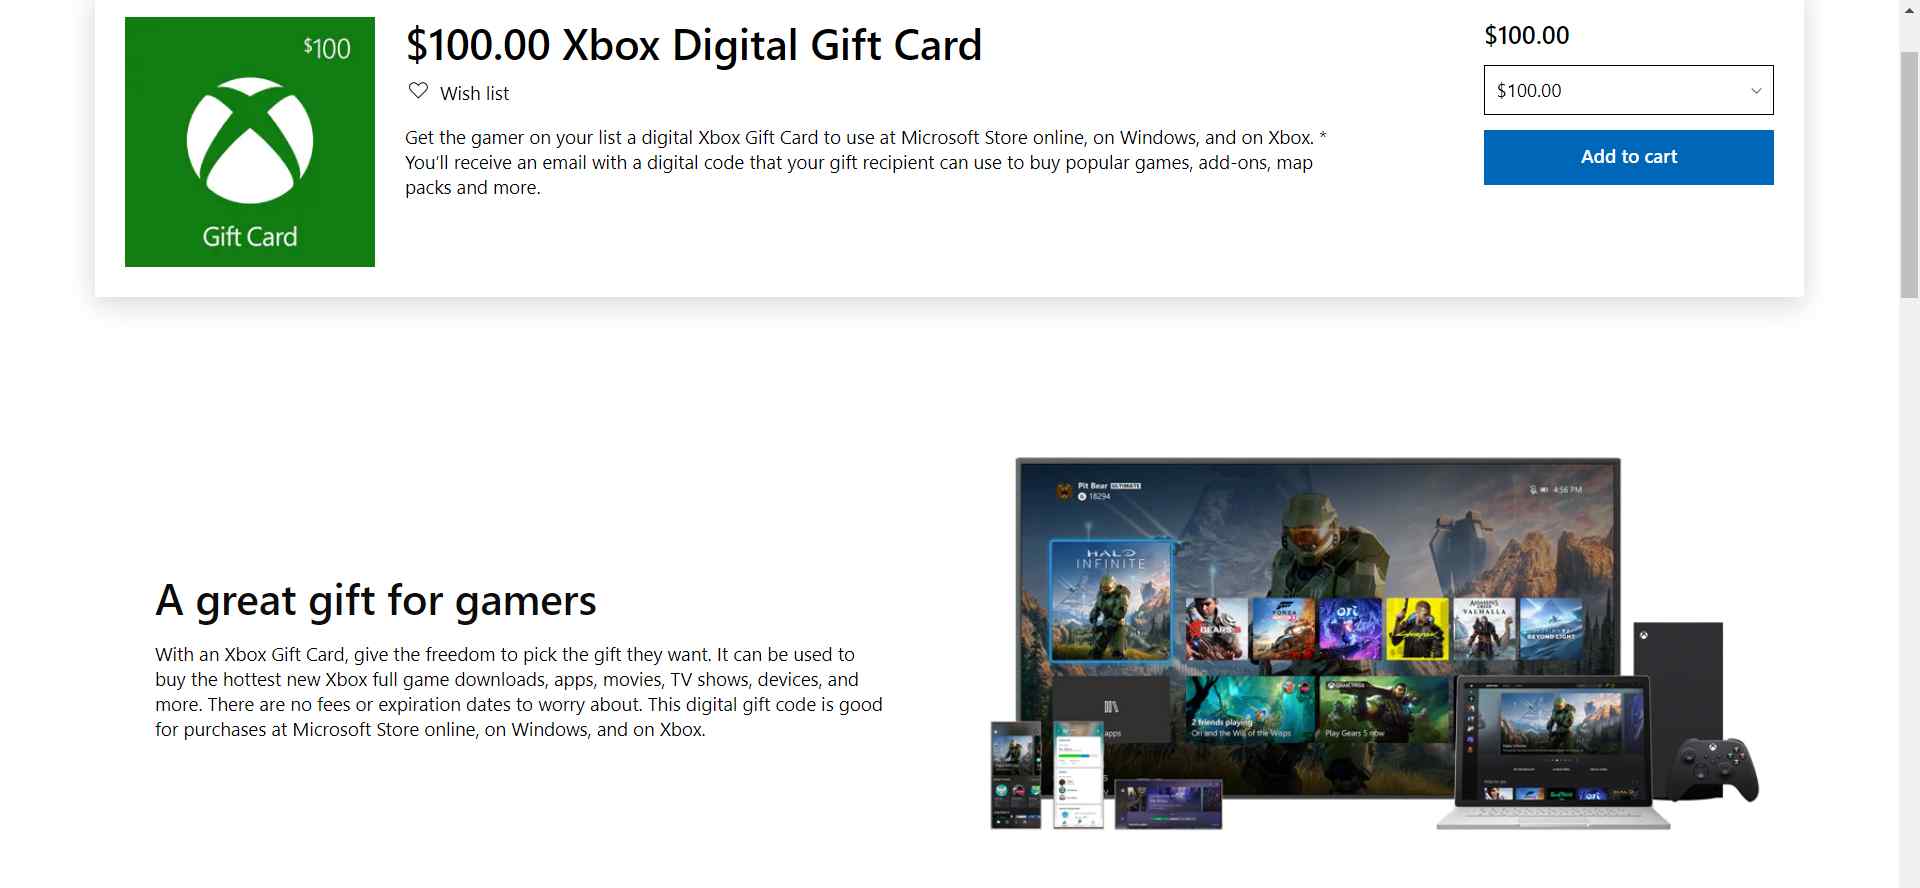 Xbox is considered one of the best game consoles in the world, and if you know someone who has one, it's not a bad idea to give them an Xbox gift card.